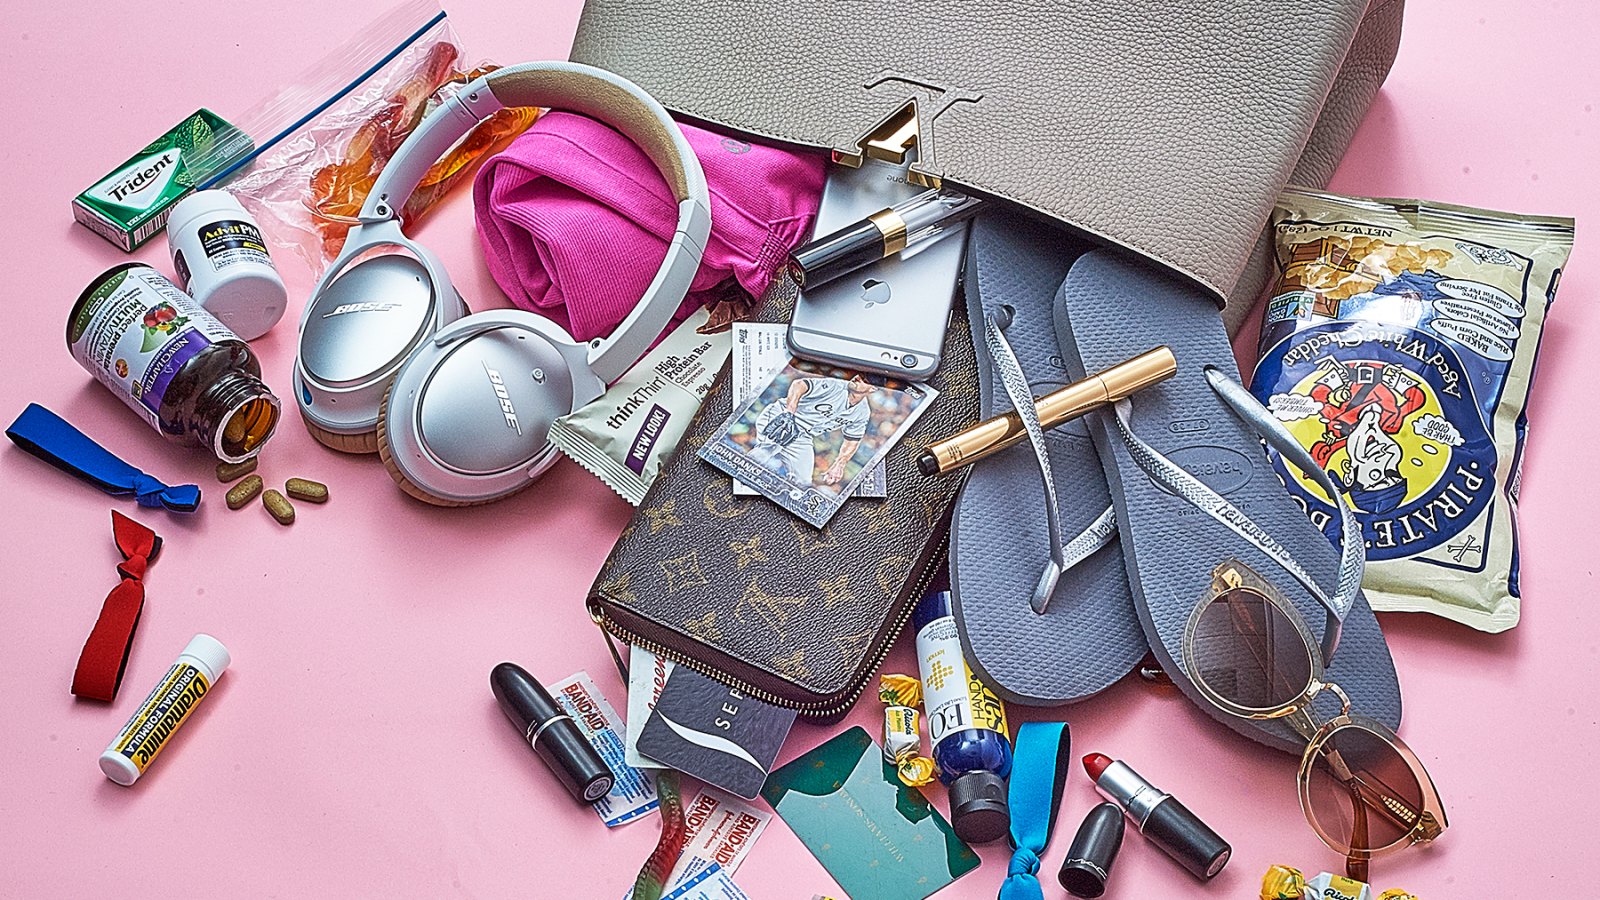 Find out what's in Ashley Monroe's bag